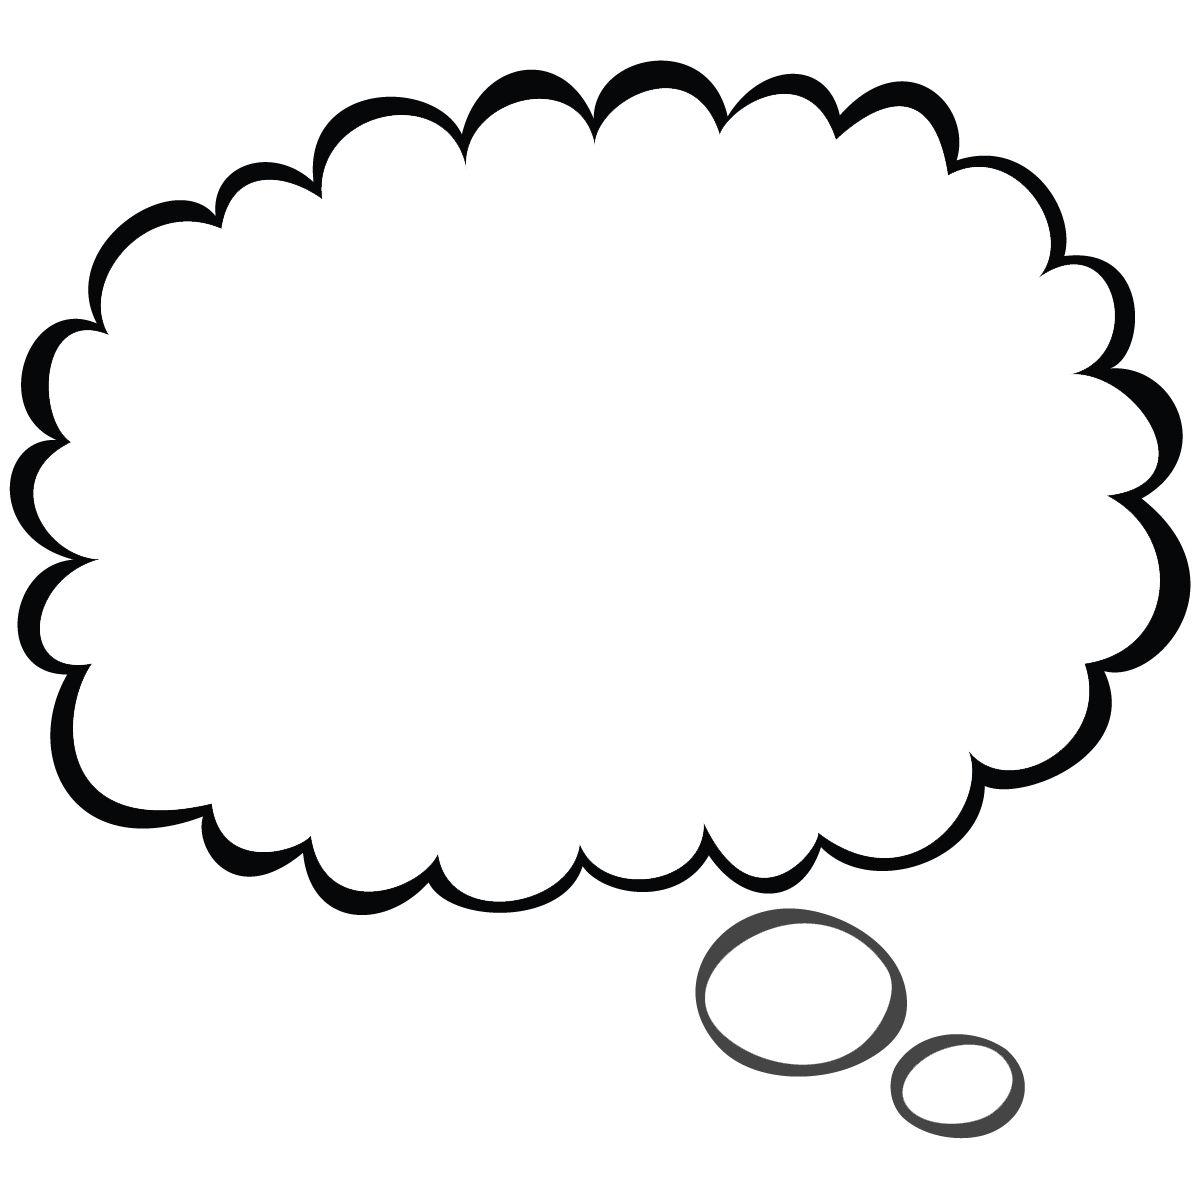 Kid With Thought Bubble Png - Thought Bubble Free Download Png, Transparent background PNG HD thumbnail